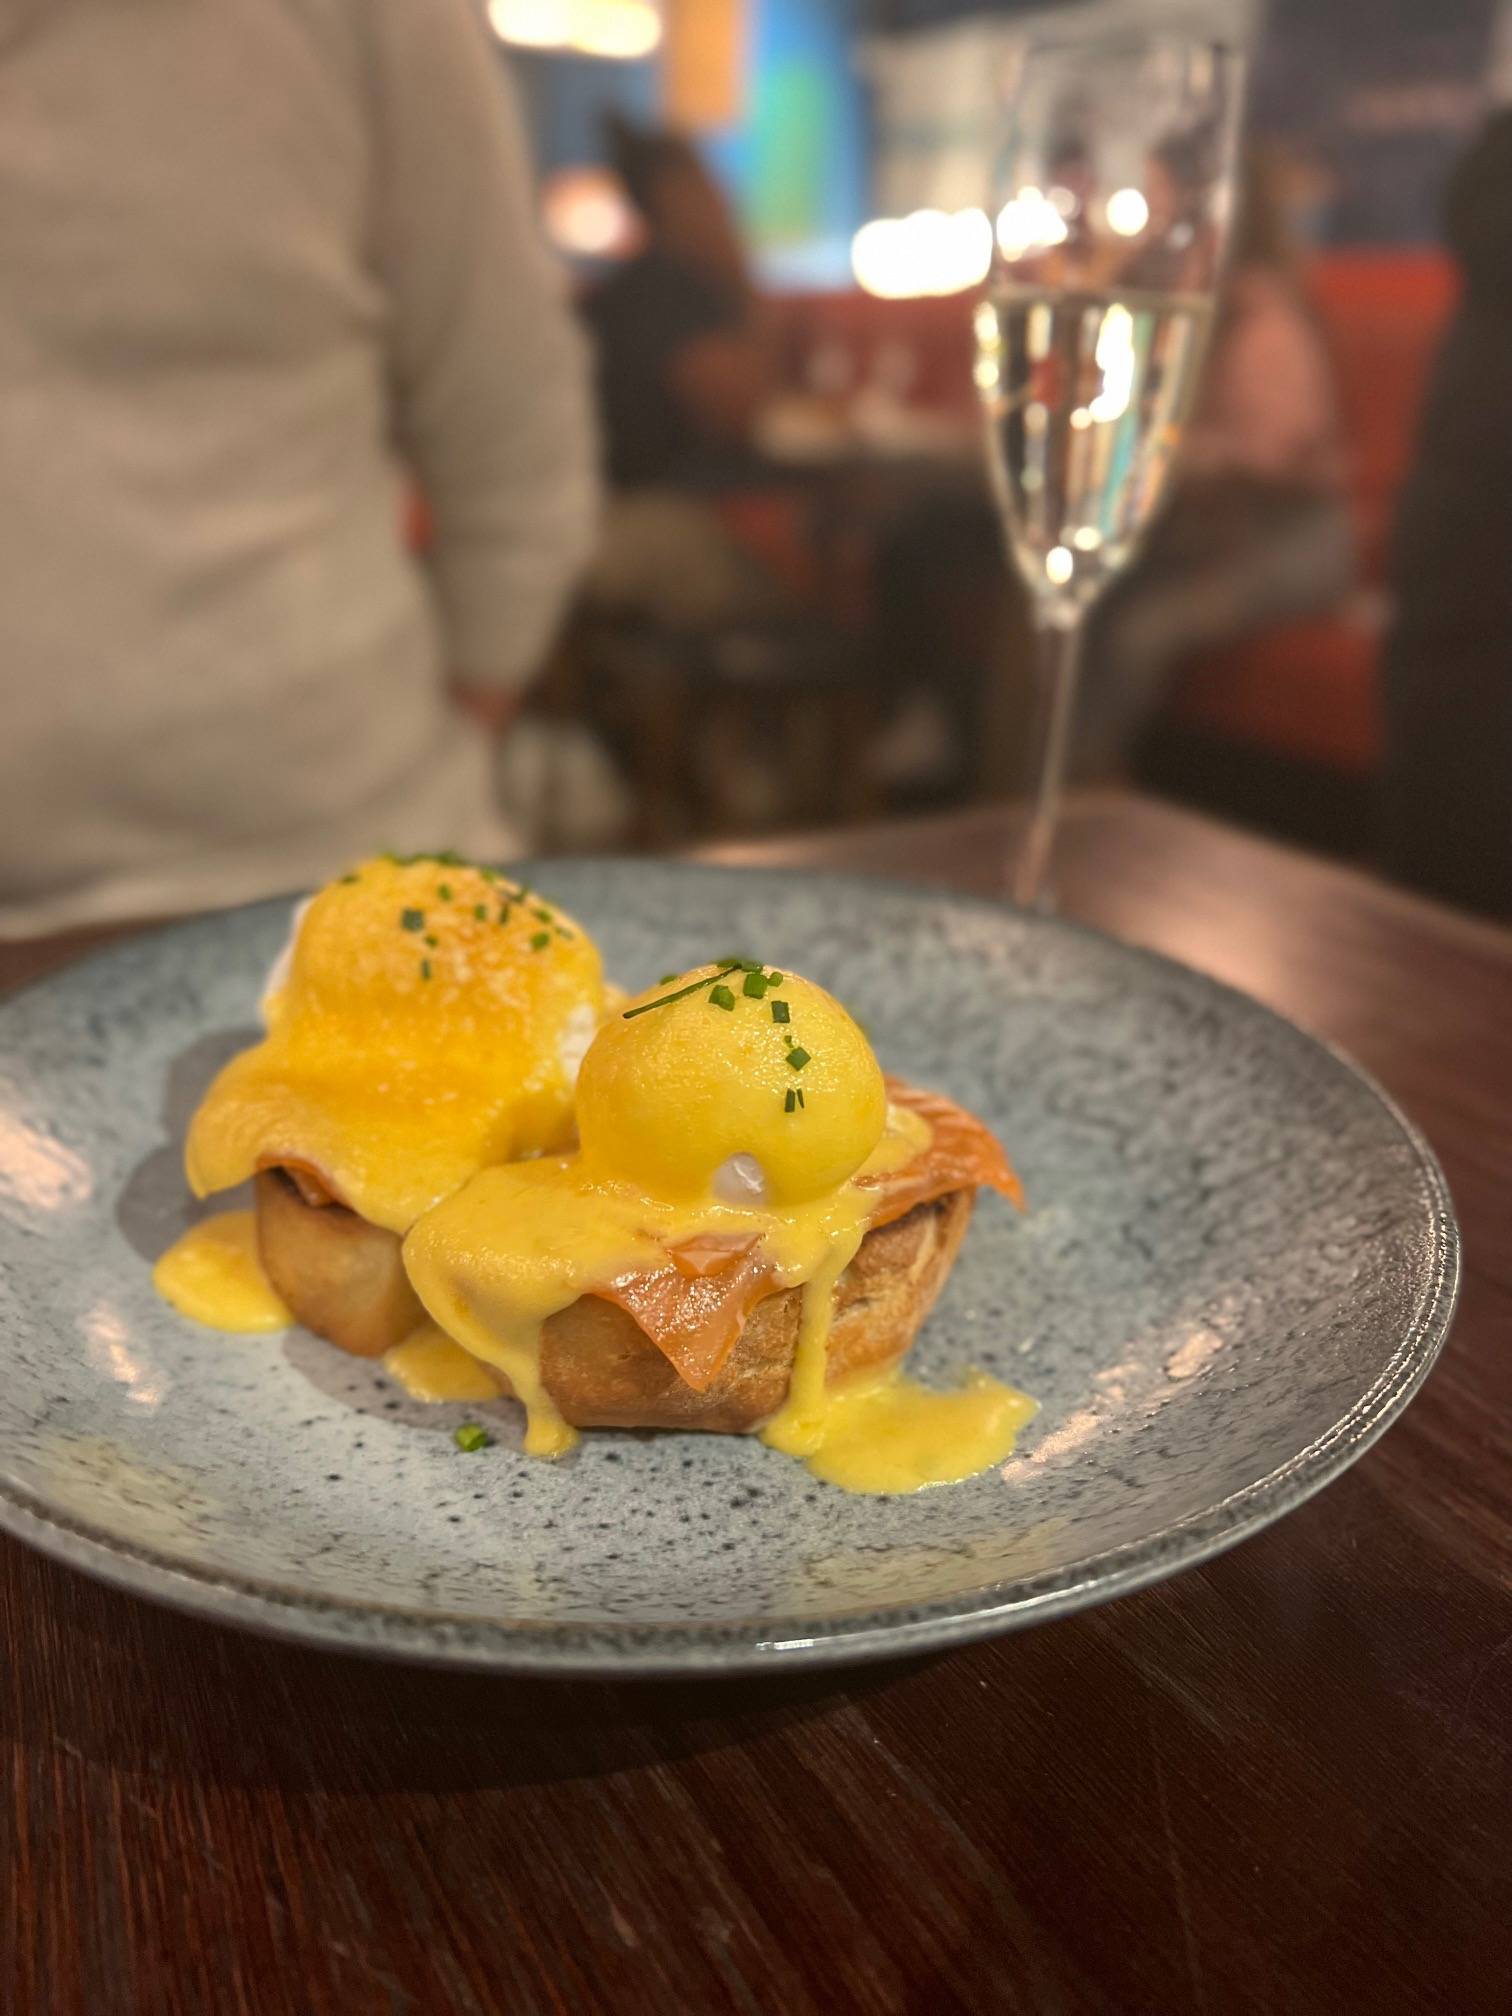 eggs royale on a blue plate